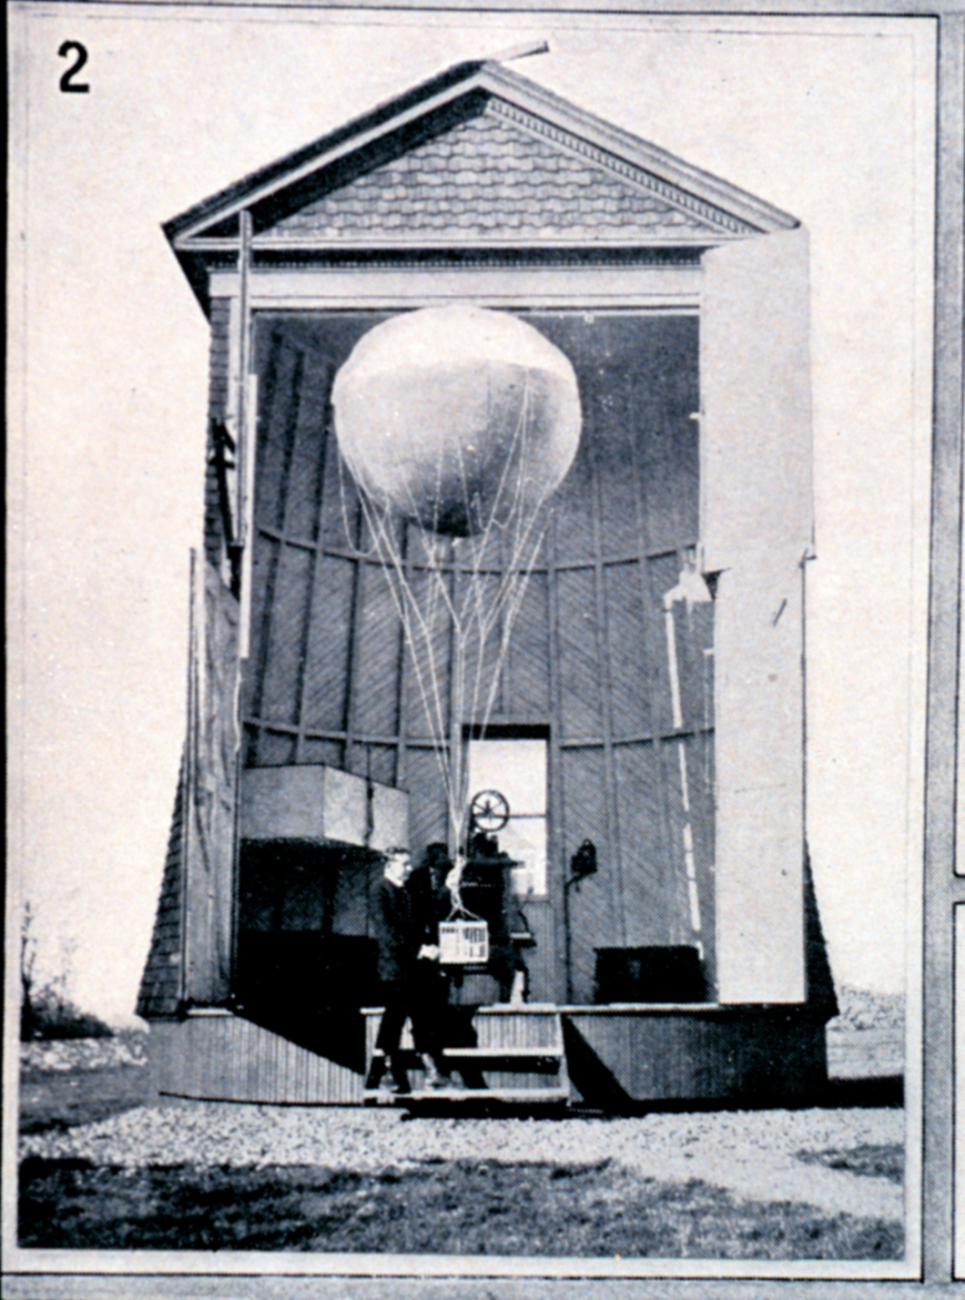 Revolving kite and balloon shed at Mount Weather Observatory